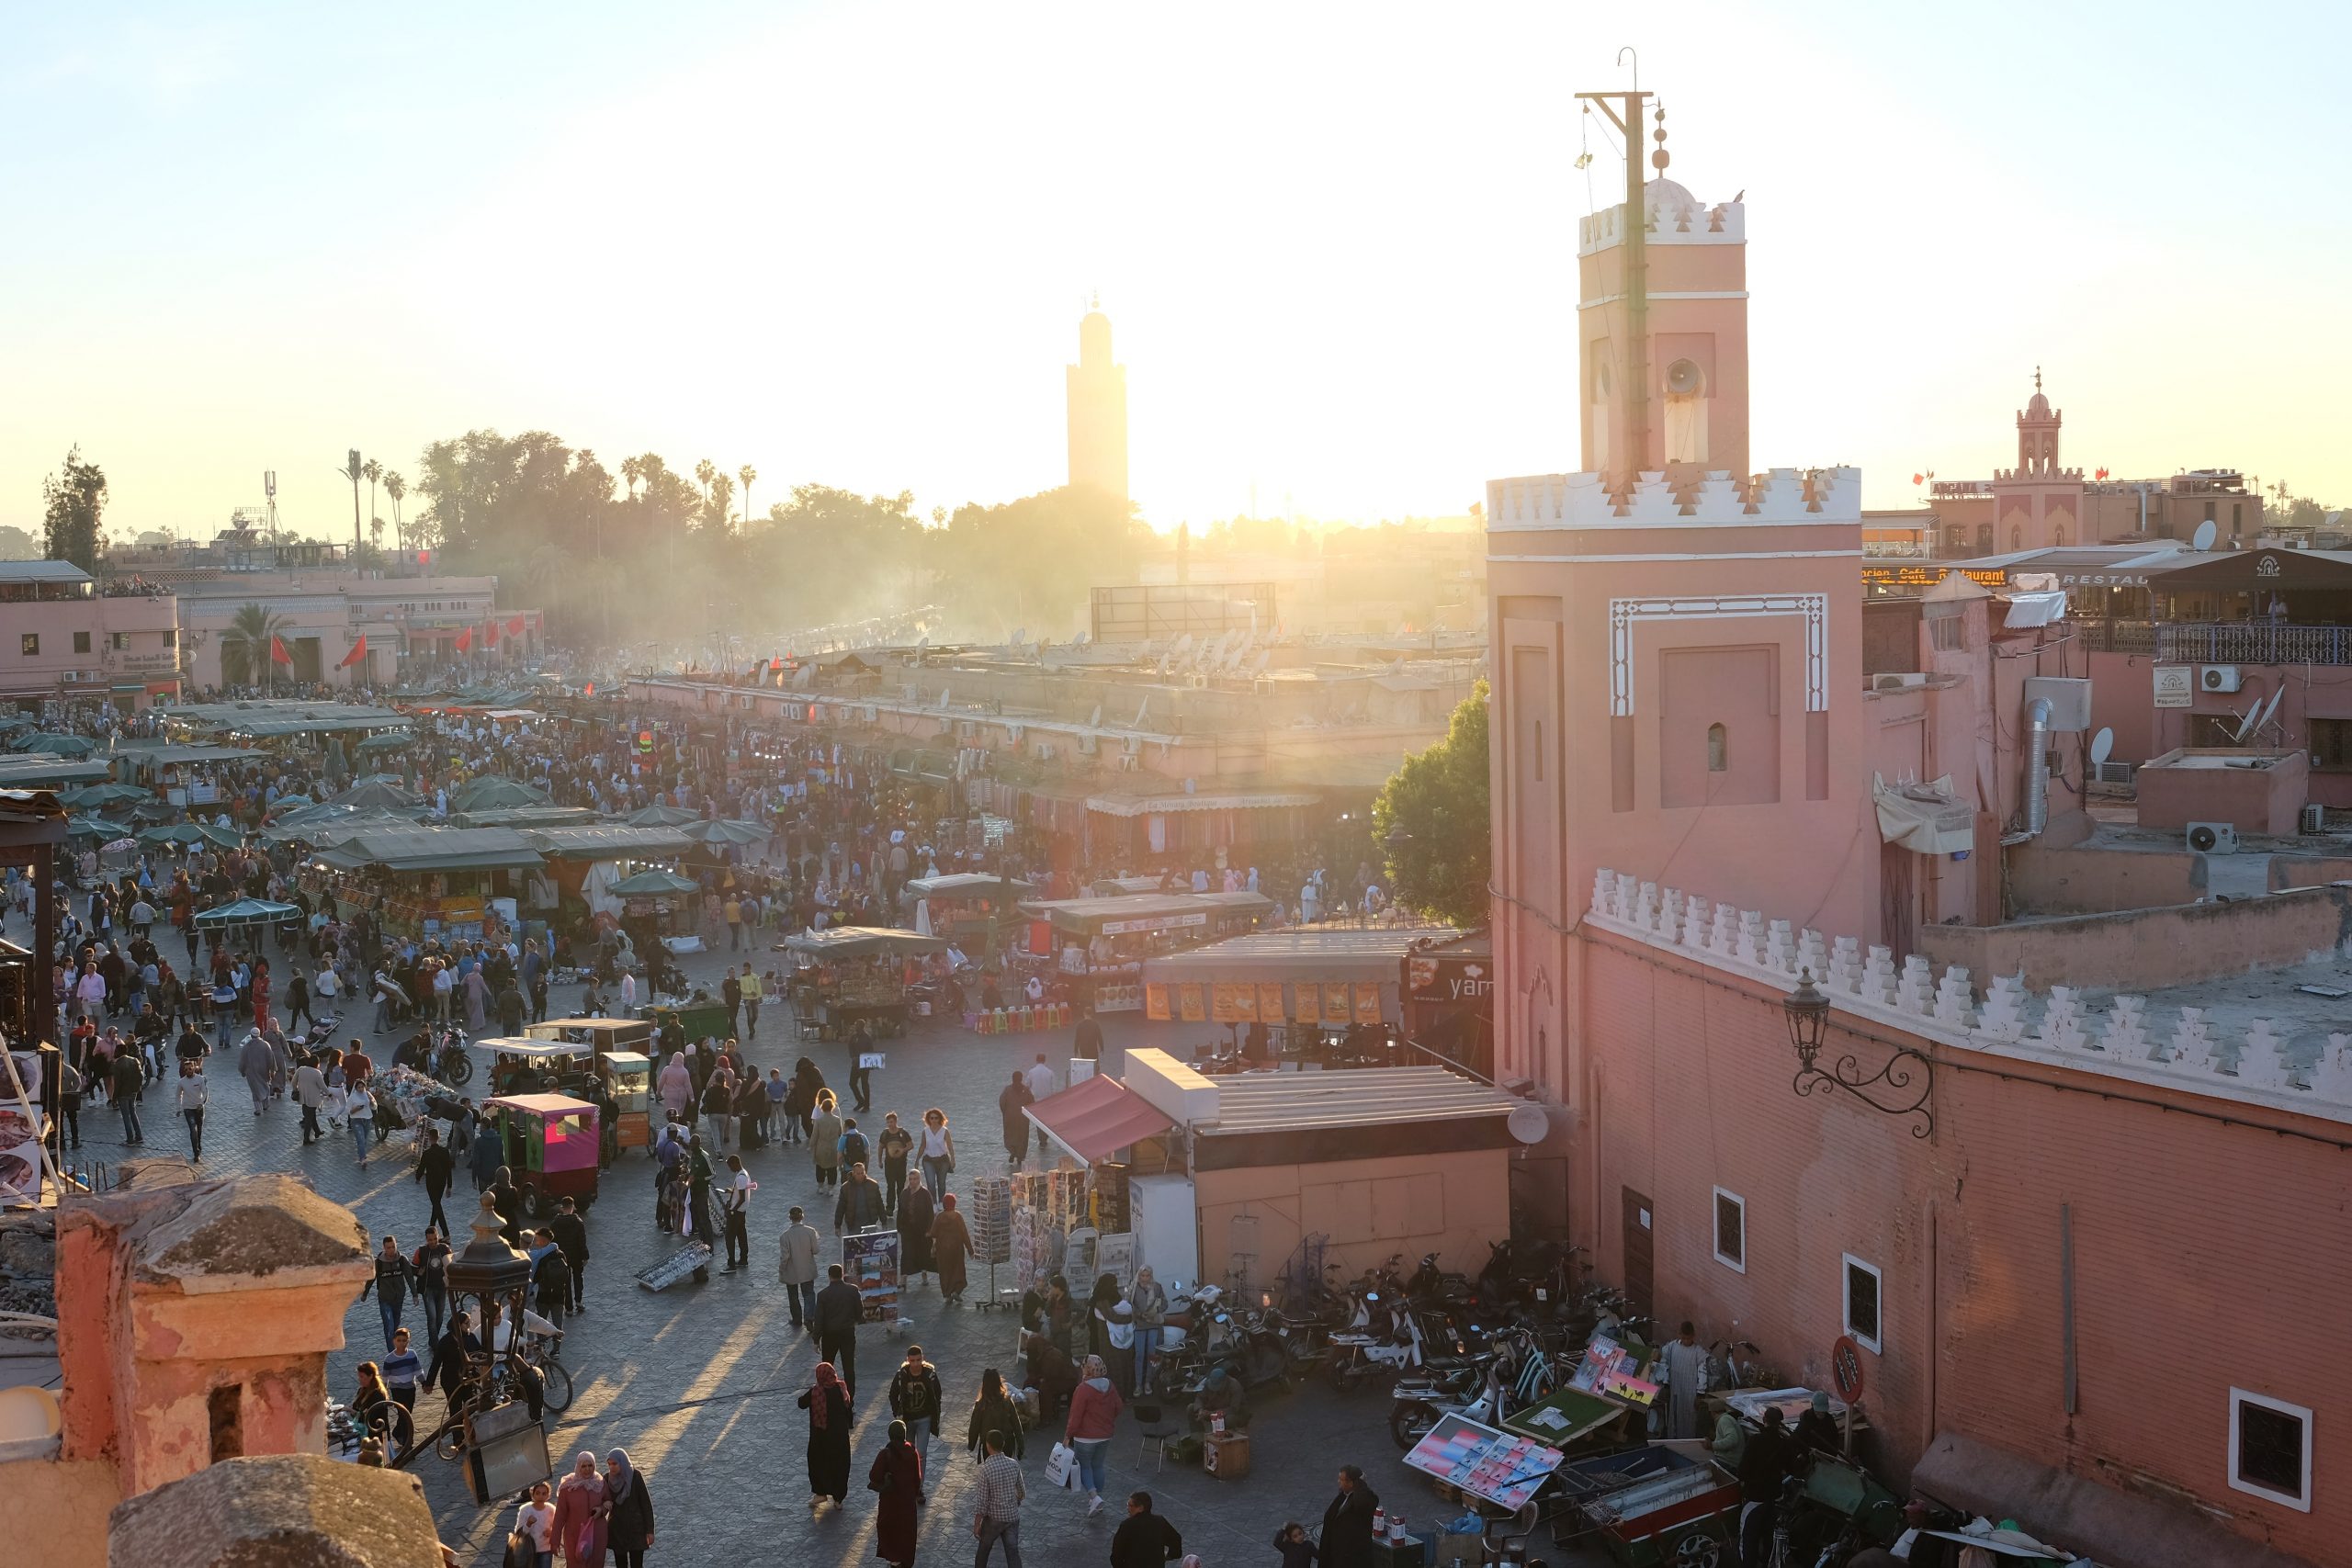 gallery image for Private Bike Tour Marrakech